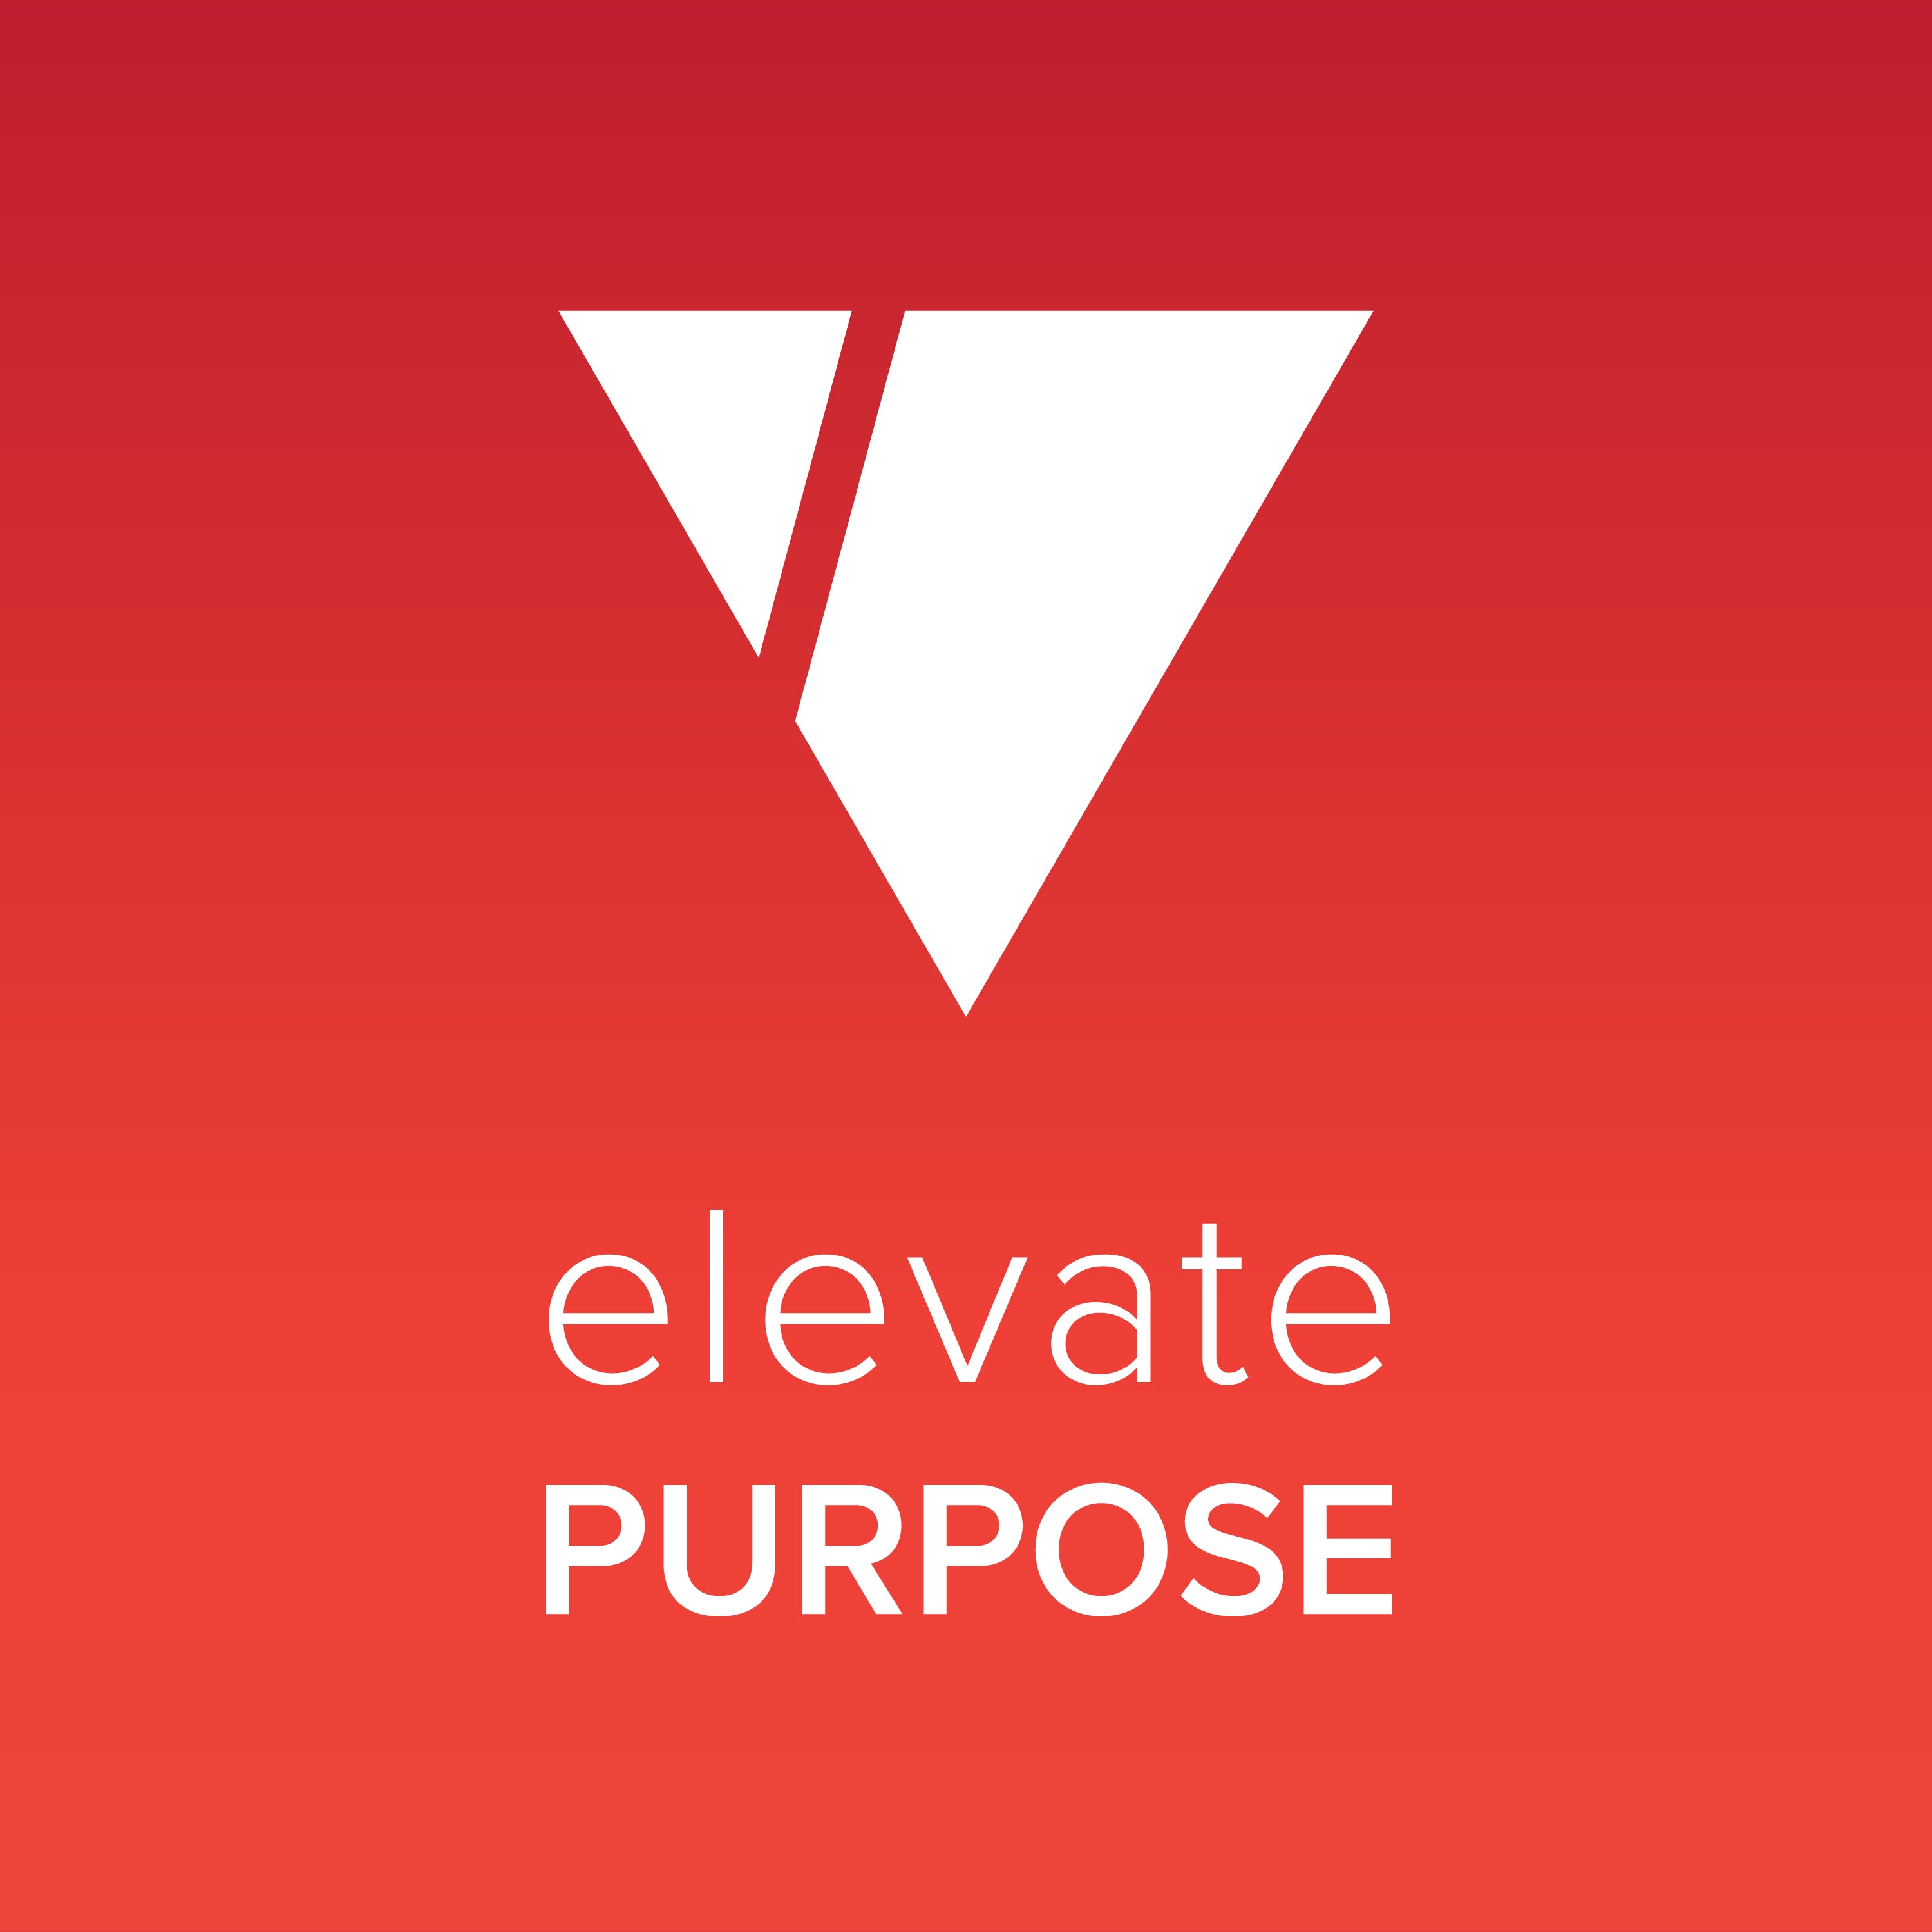 Elevate Purpose - Rev Stan Sloan of Proud2Share talks about alleviating LGBTQ poverty media 2